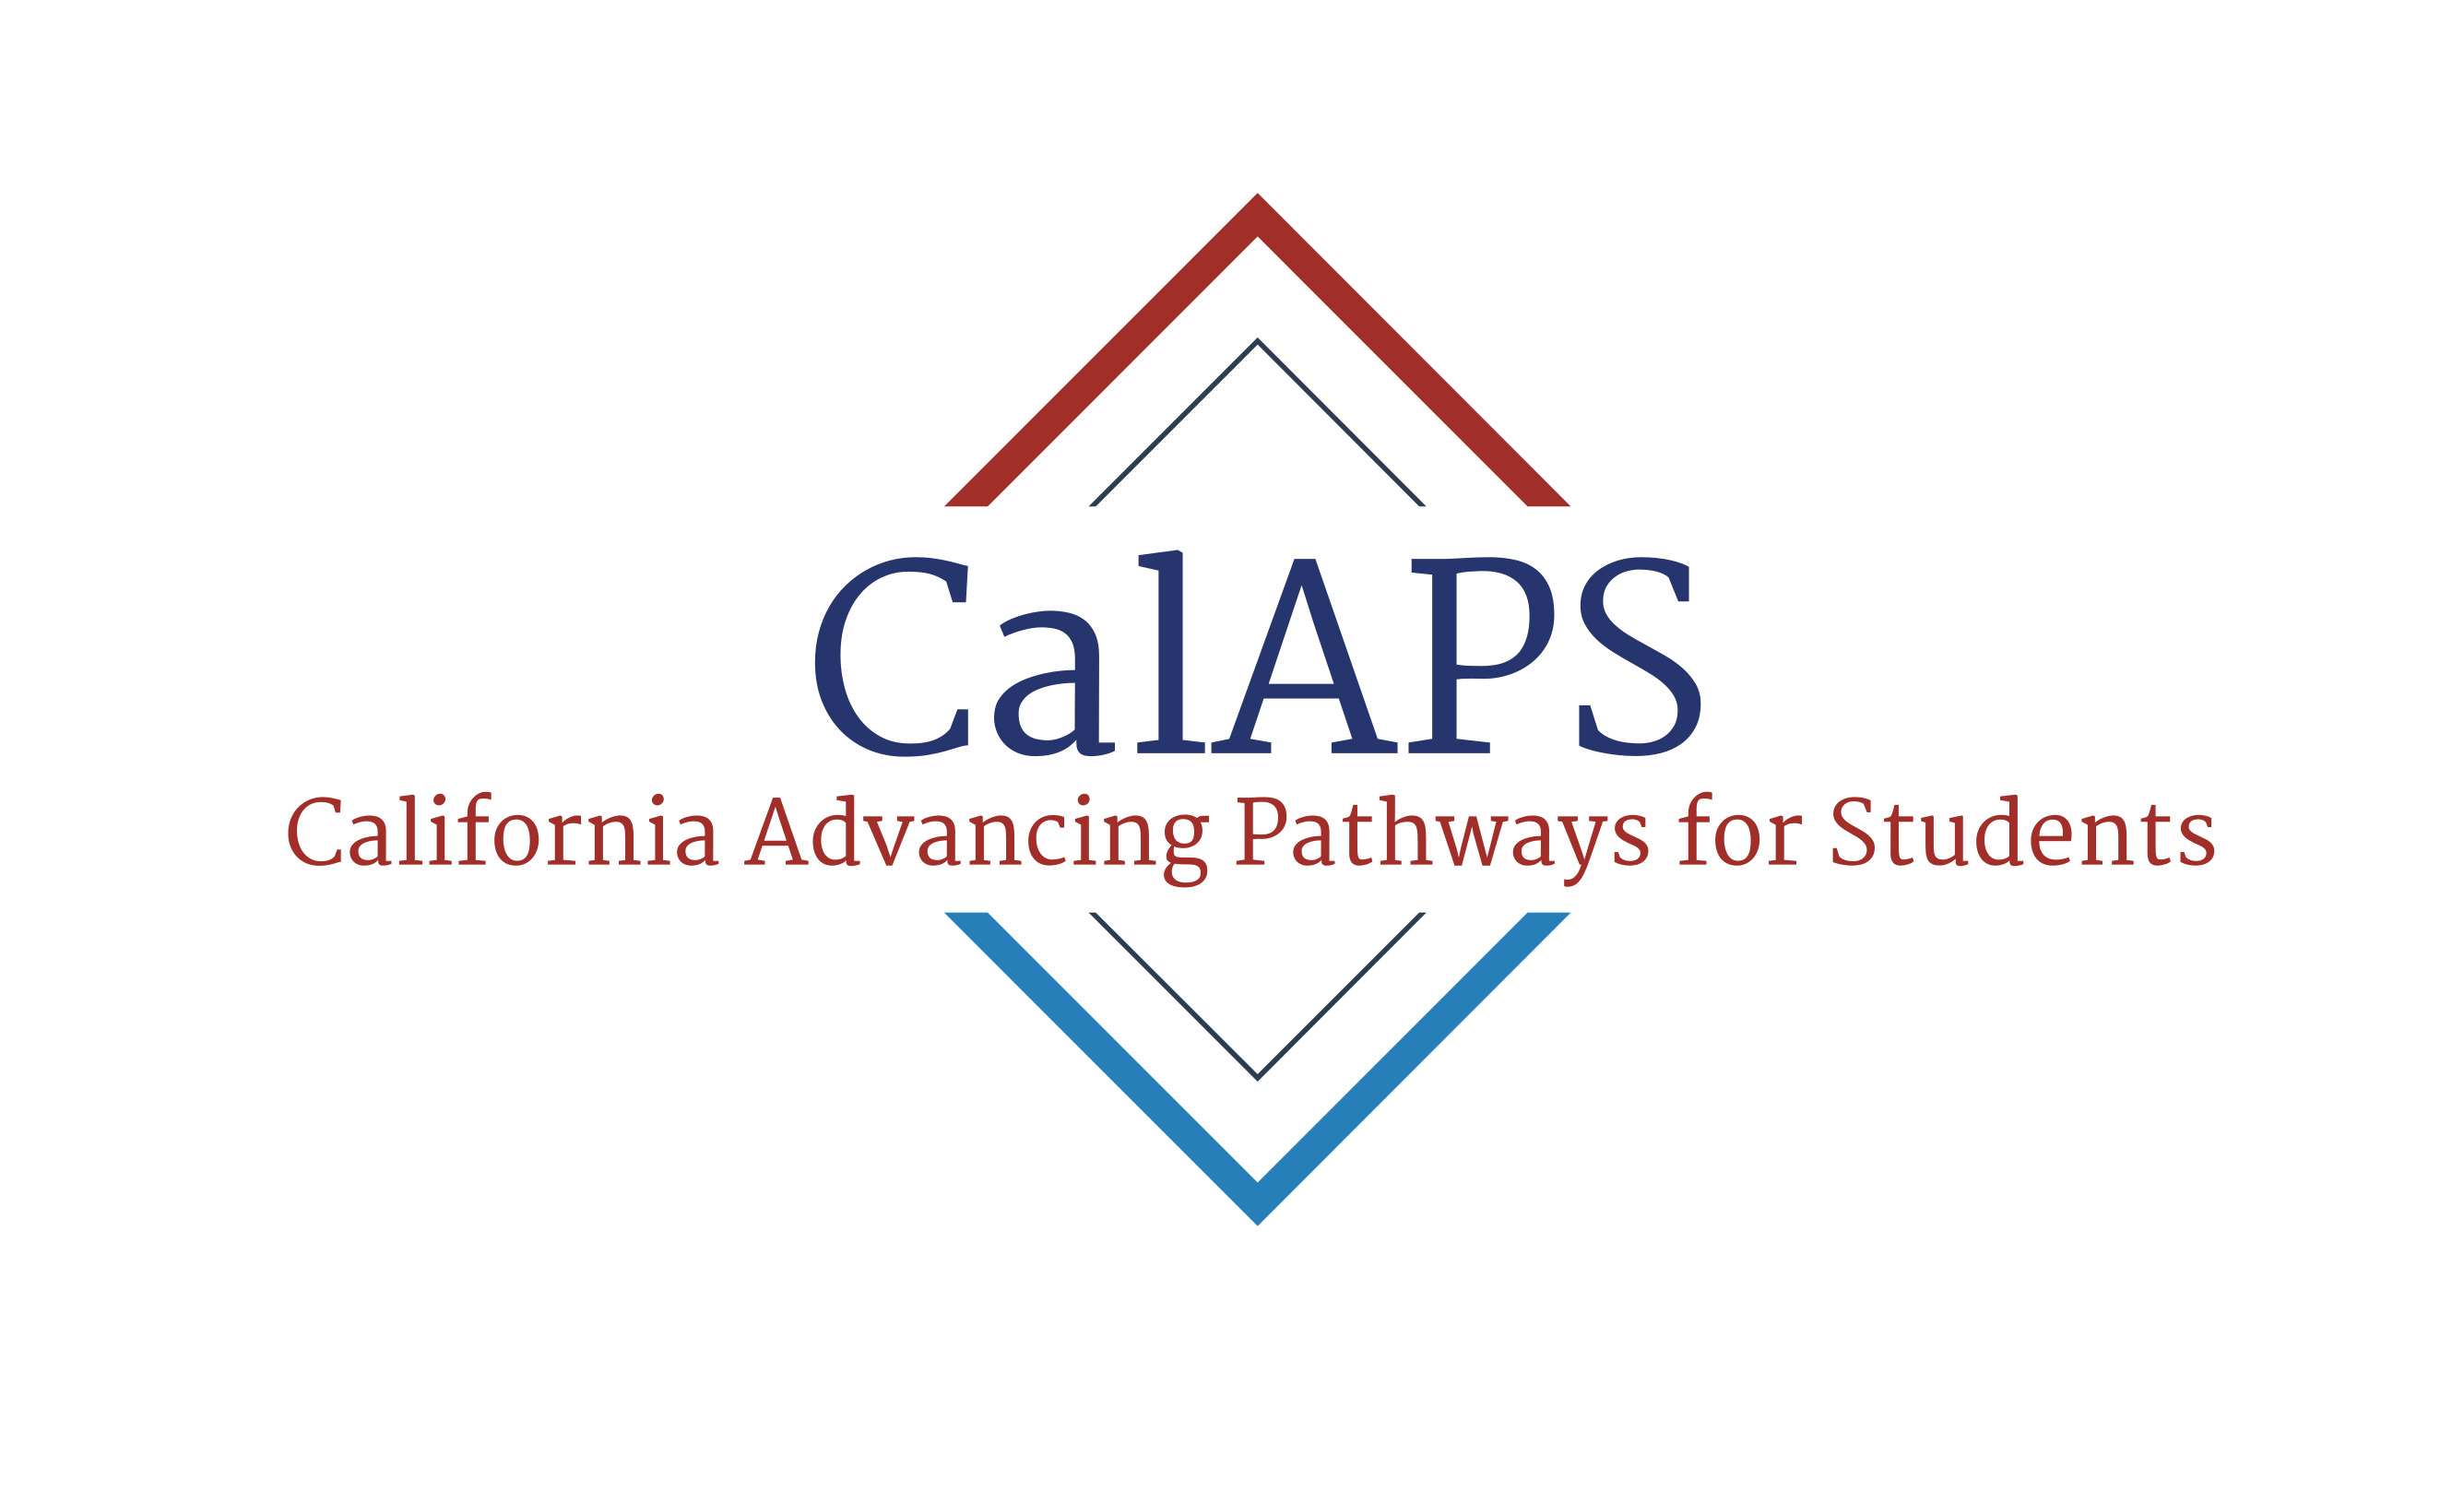 California Advancing Pathways for Students Logo